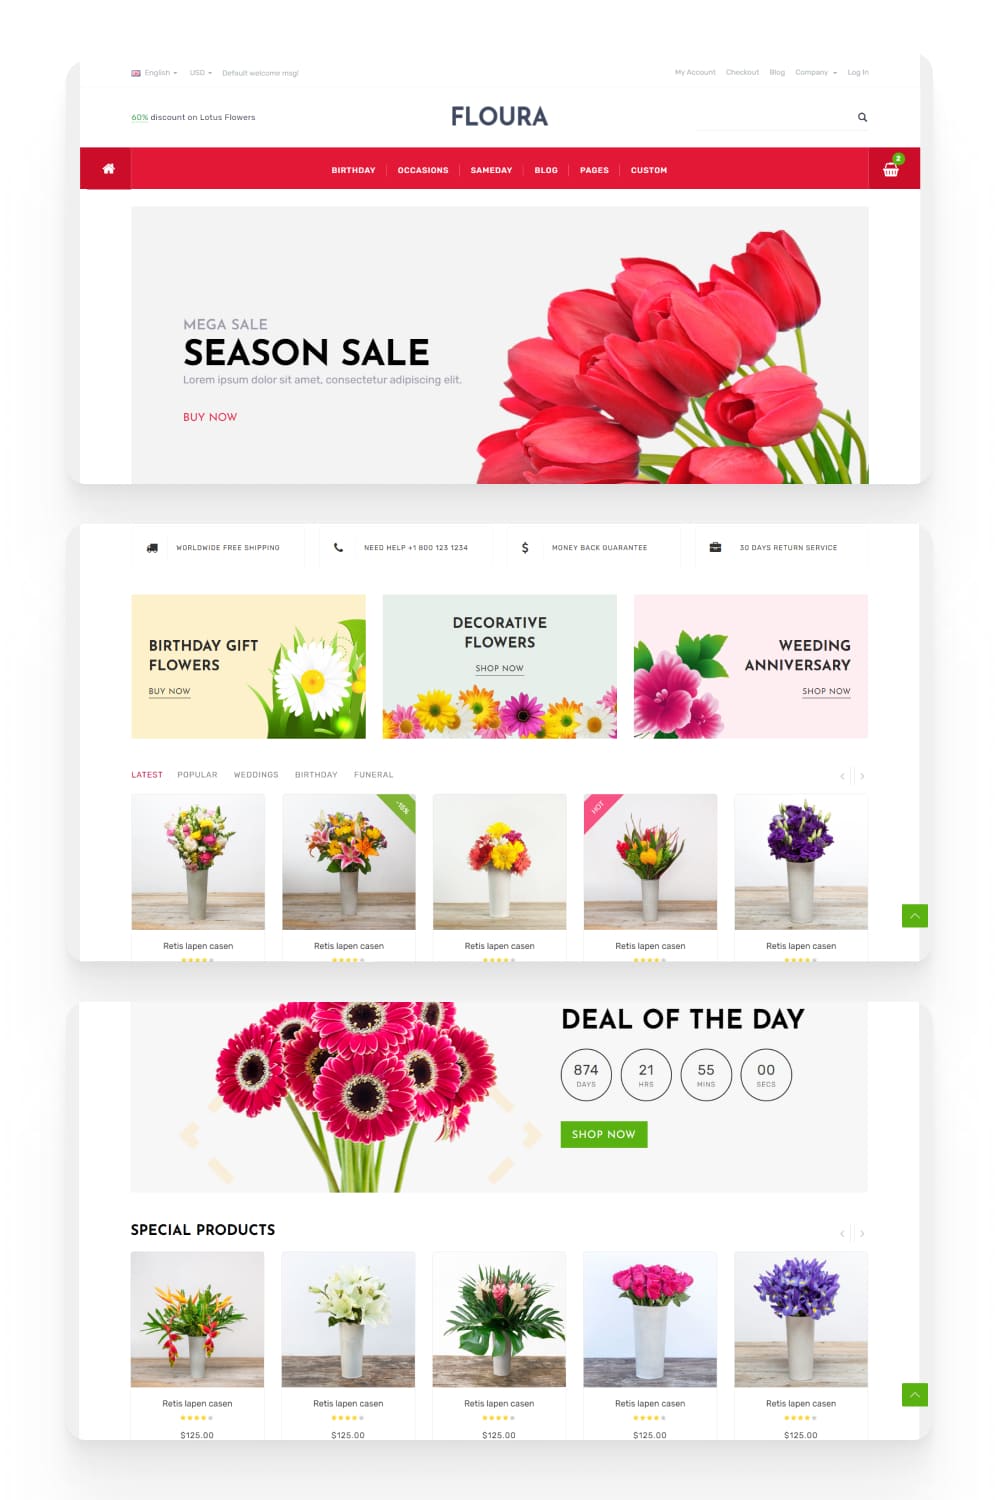 Screenshot of an online store with photos of original bouquets in vases.